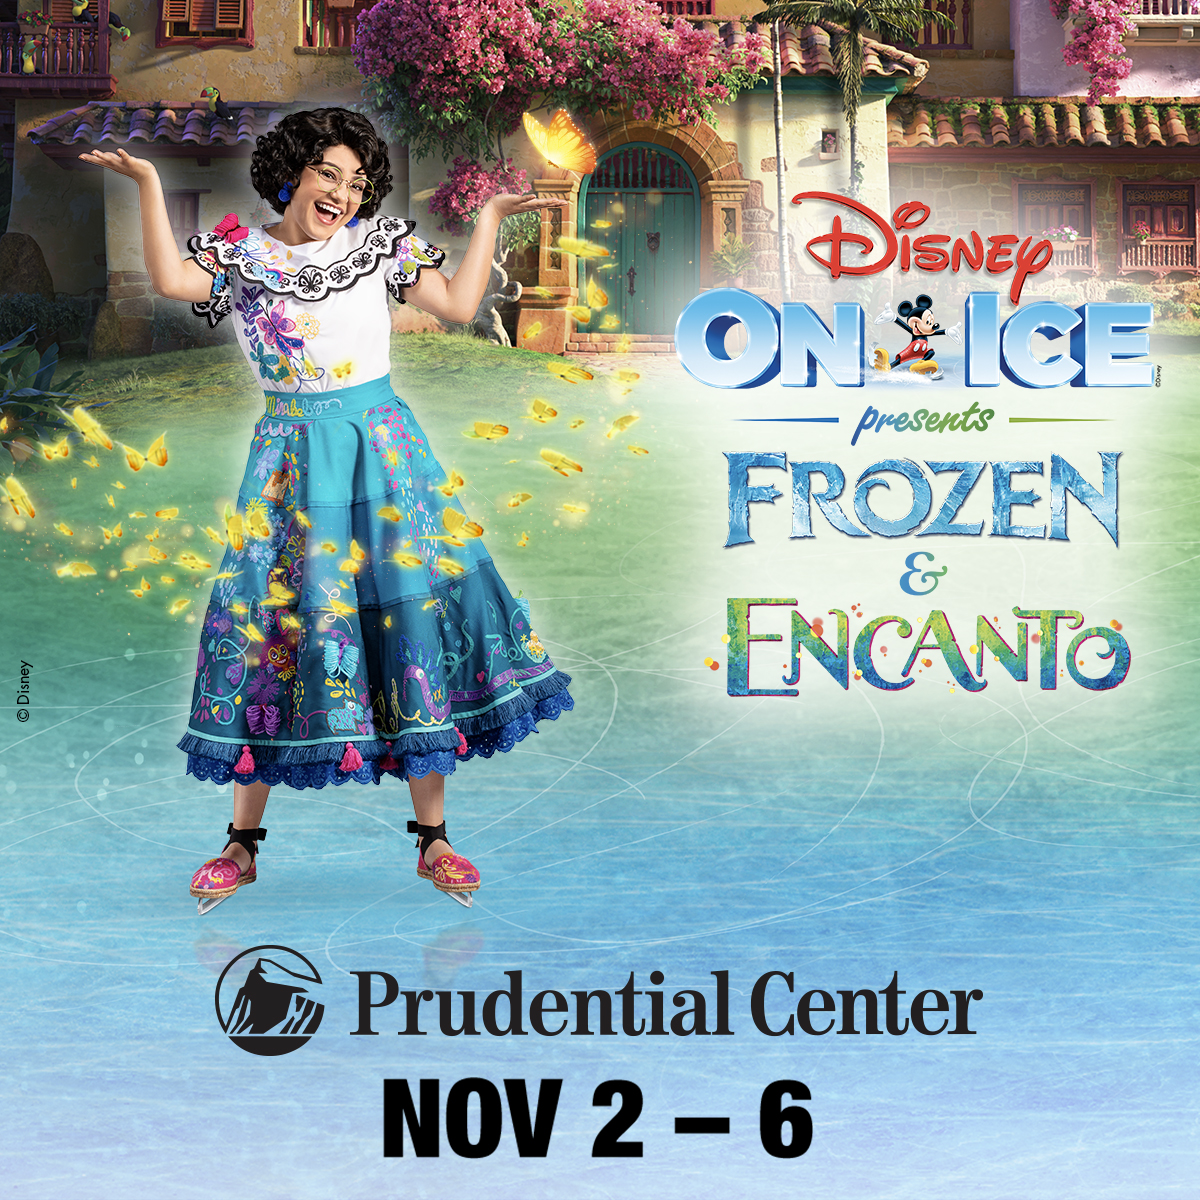 We can't wait for our friends at @disneyonice to visit this week! ⛸️ Get your tickets for #Frozen ❄️ & #Encanto ✨ More info: bit.ly/Frozencanto